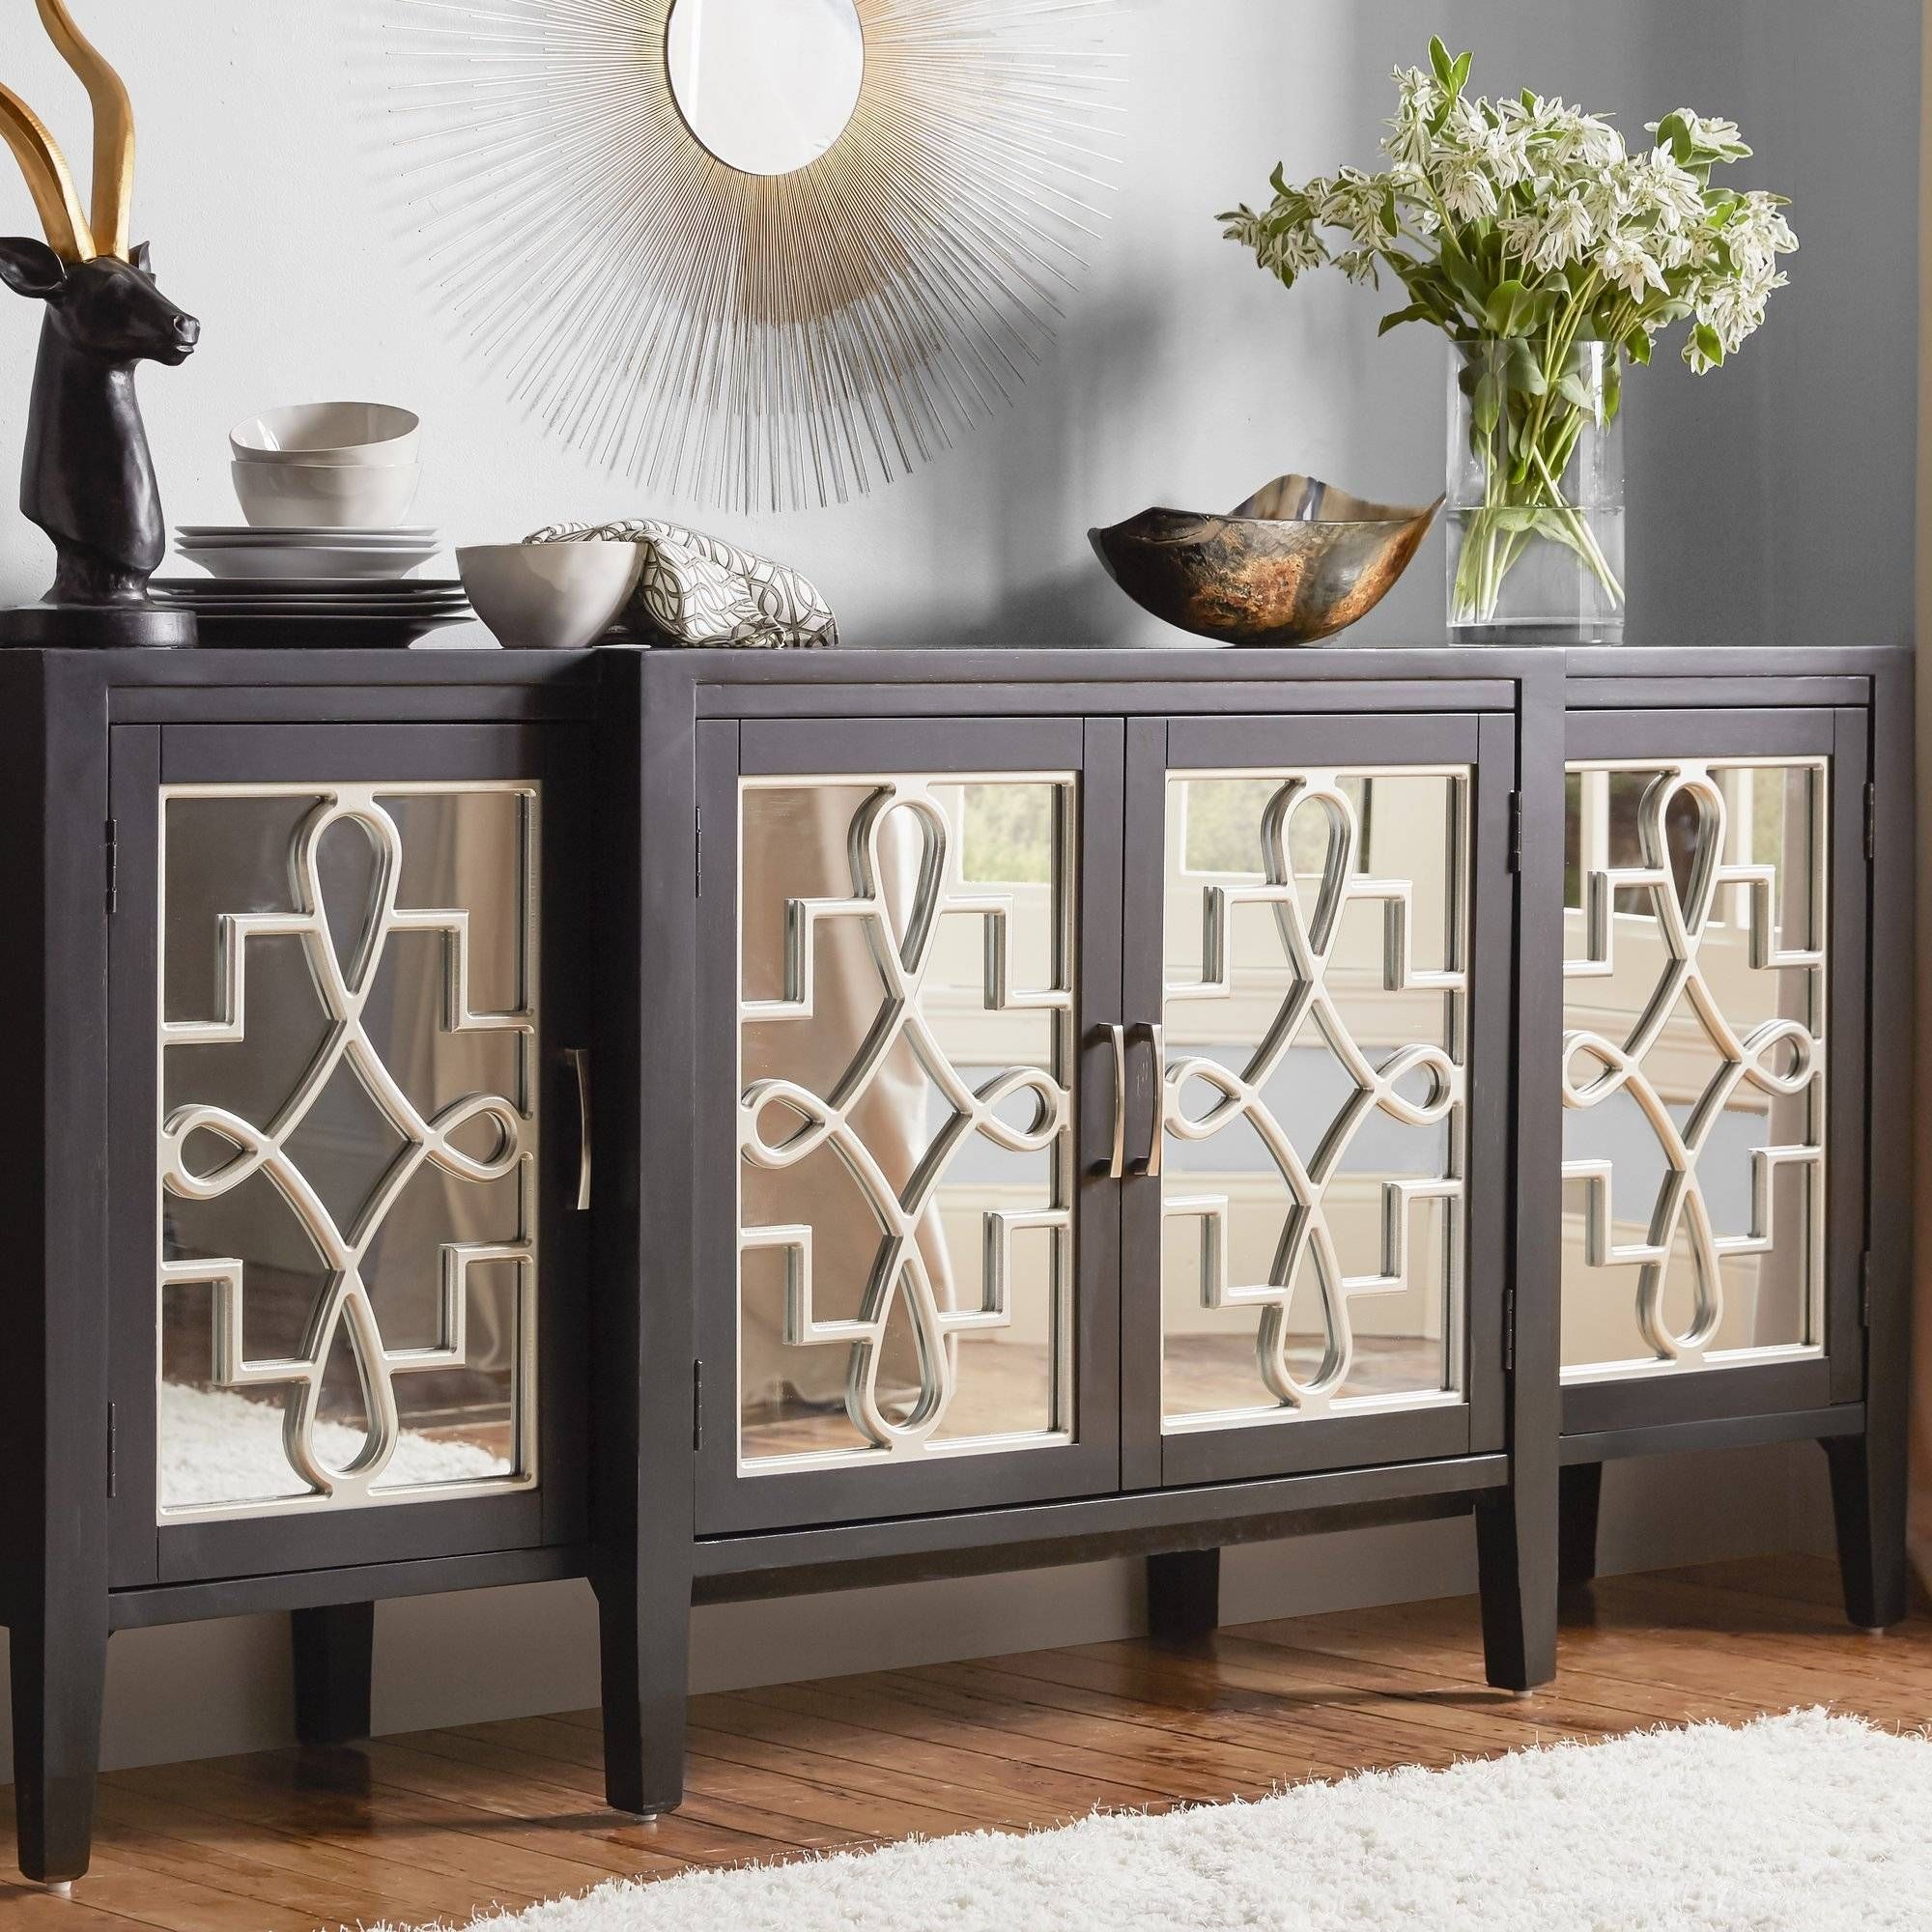 Furniture: Mirrored Buffet Sideboard | Distressed Sideboard Throughout Mirrored Sideboards And Buffets (View 10 of 15)